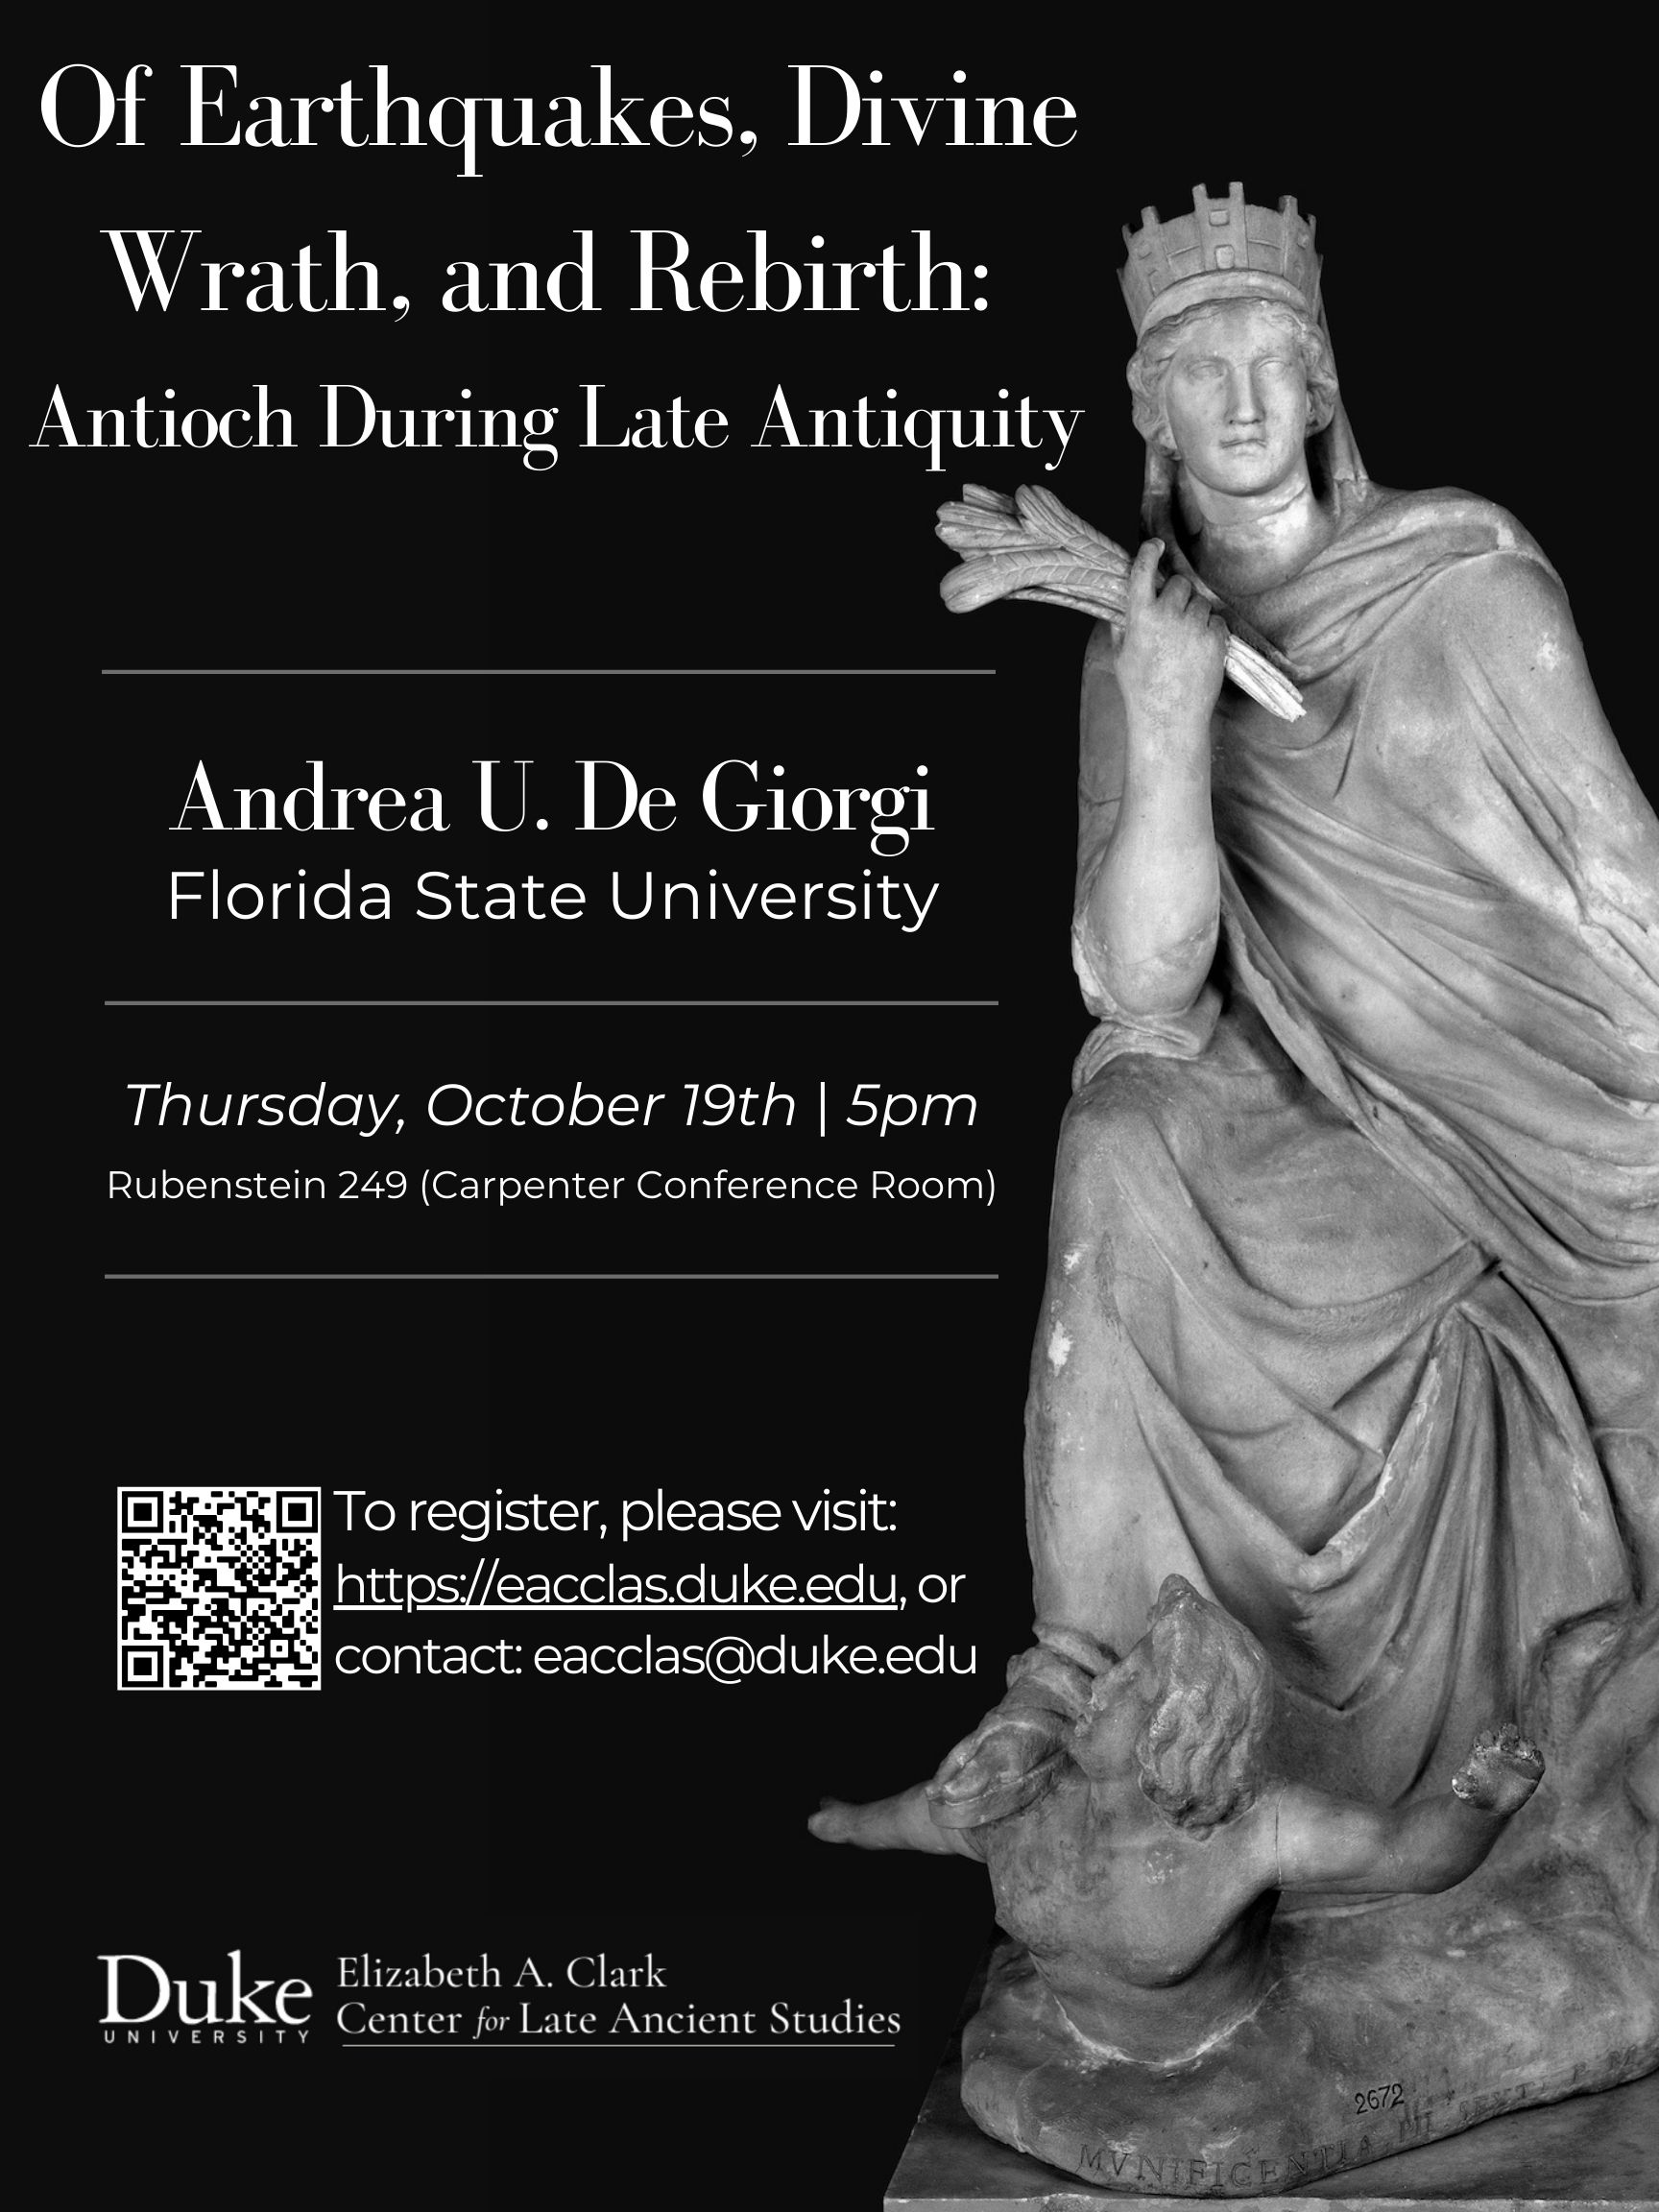 Lecture poster for Andrea U. De Giorgi. Lecture is entitled, "Of Earthquakes, Divine Warth, and Rebirth: Antioch During Late Antiquity. It will take place on Thursday, October 19th at 5pm at Duke University.